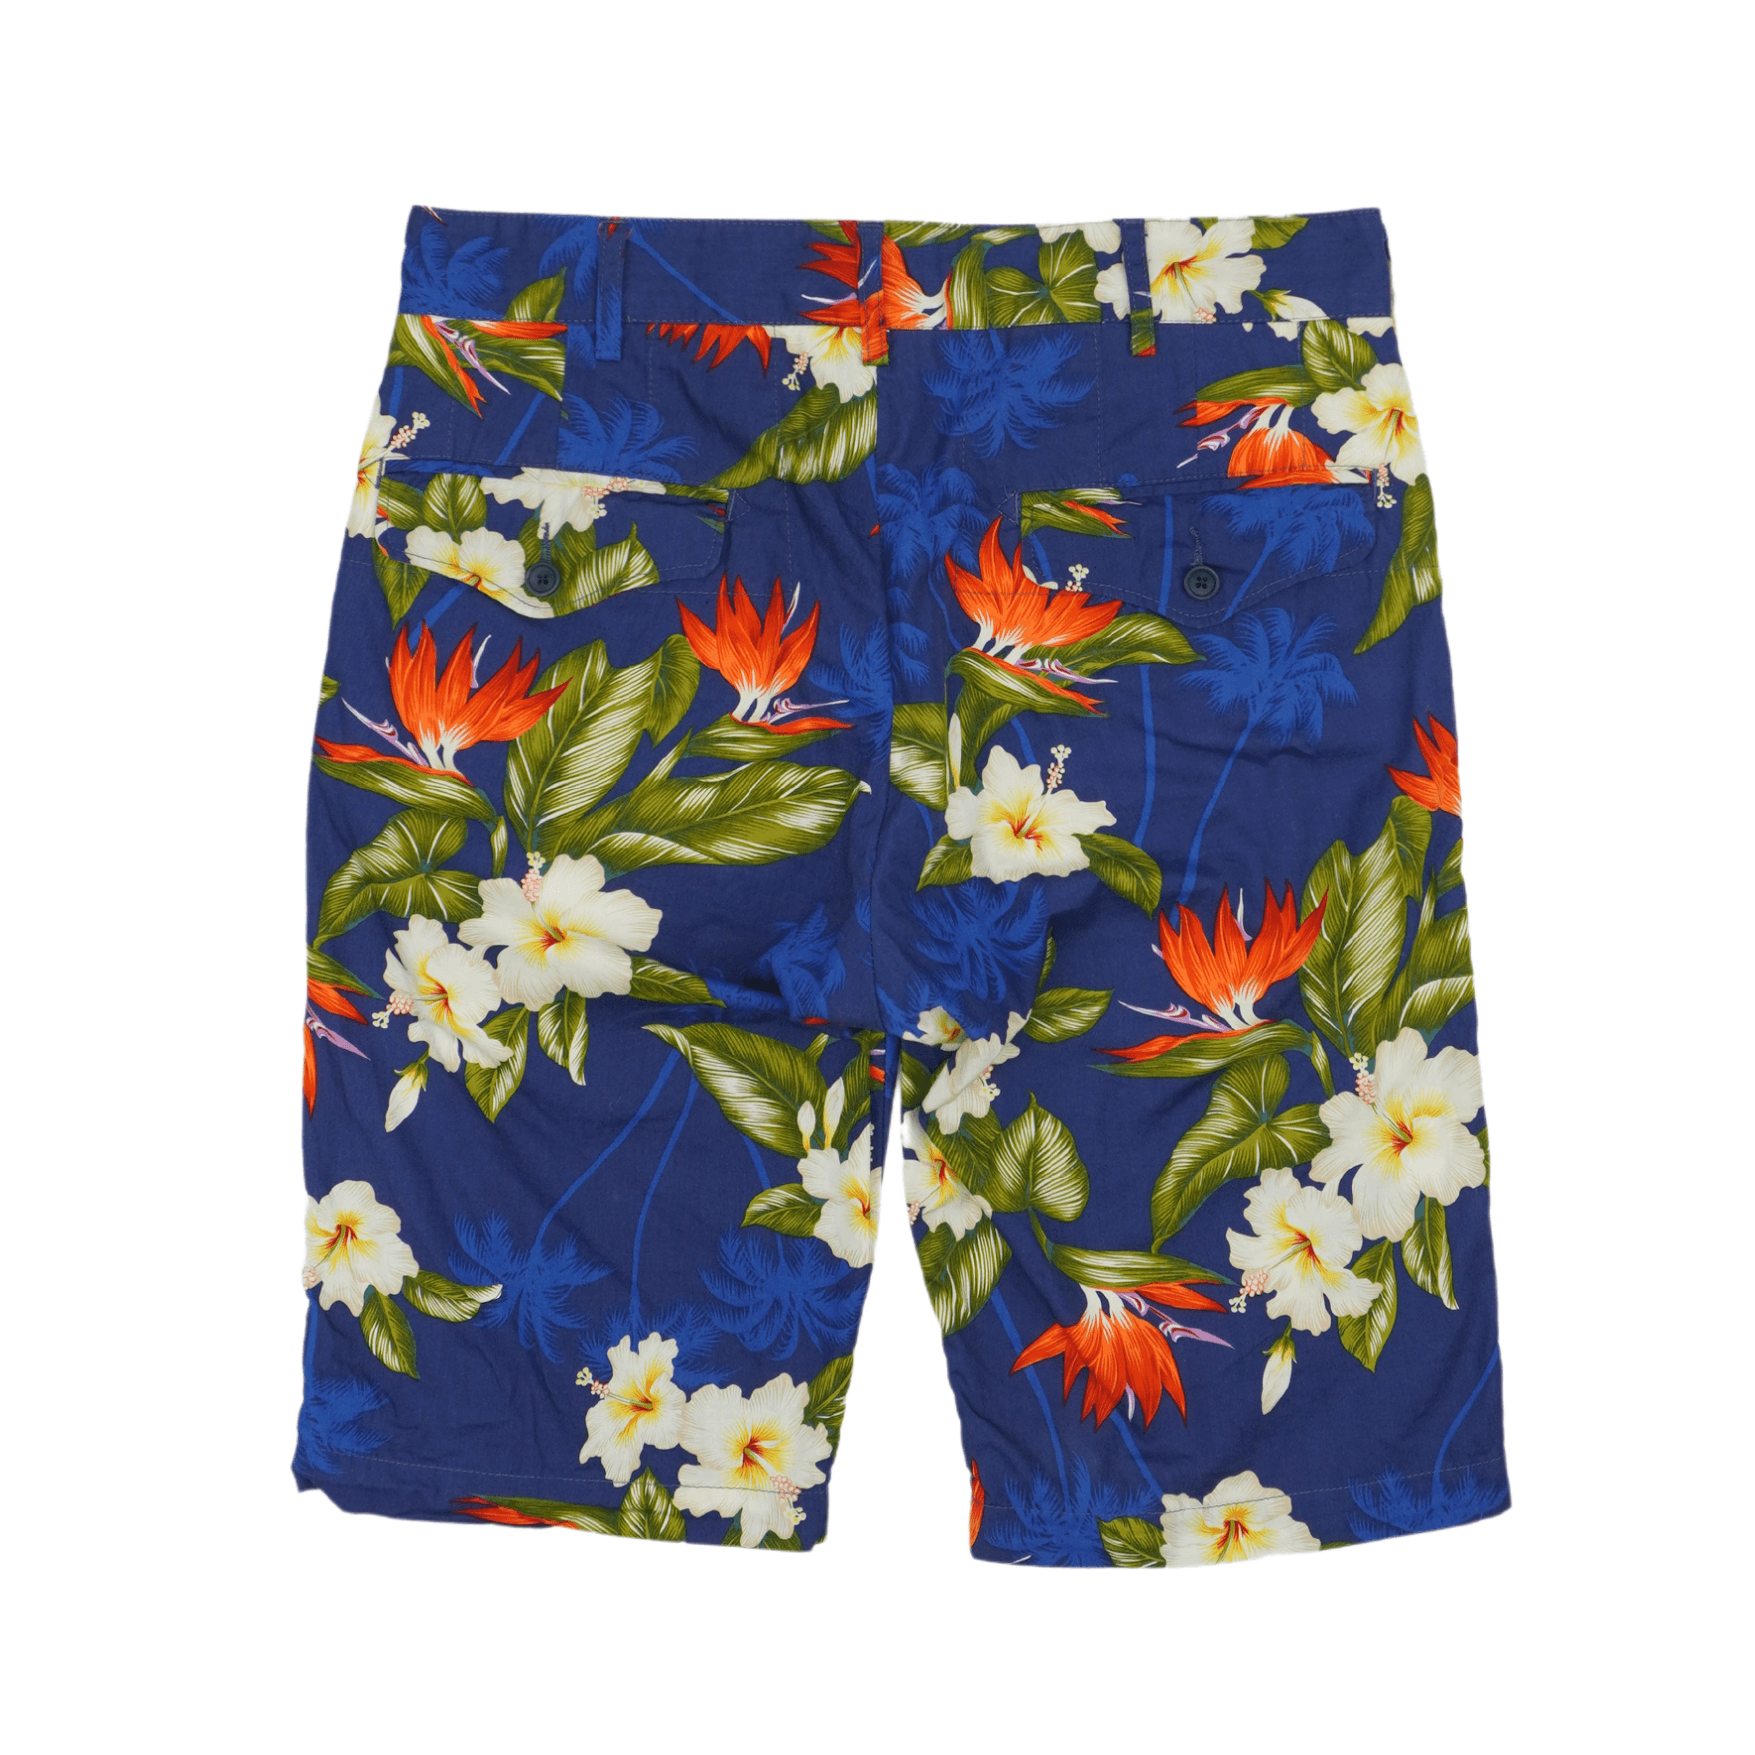 Engineered Garments Shorts - Men's 32 - Fashionably Yours